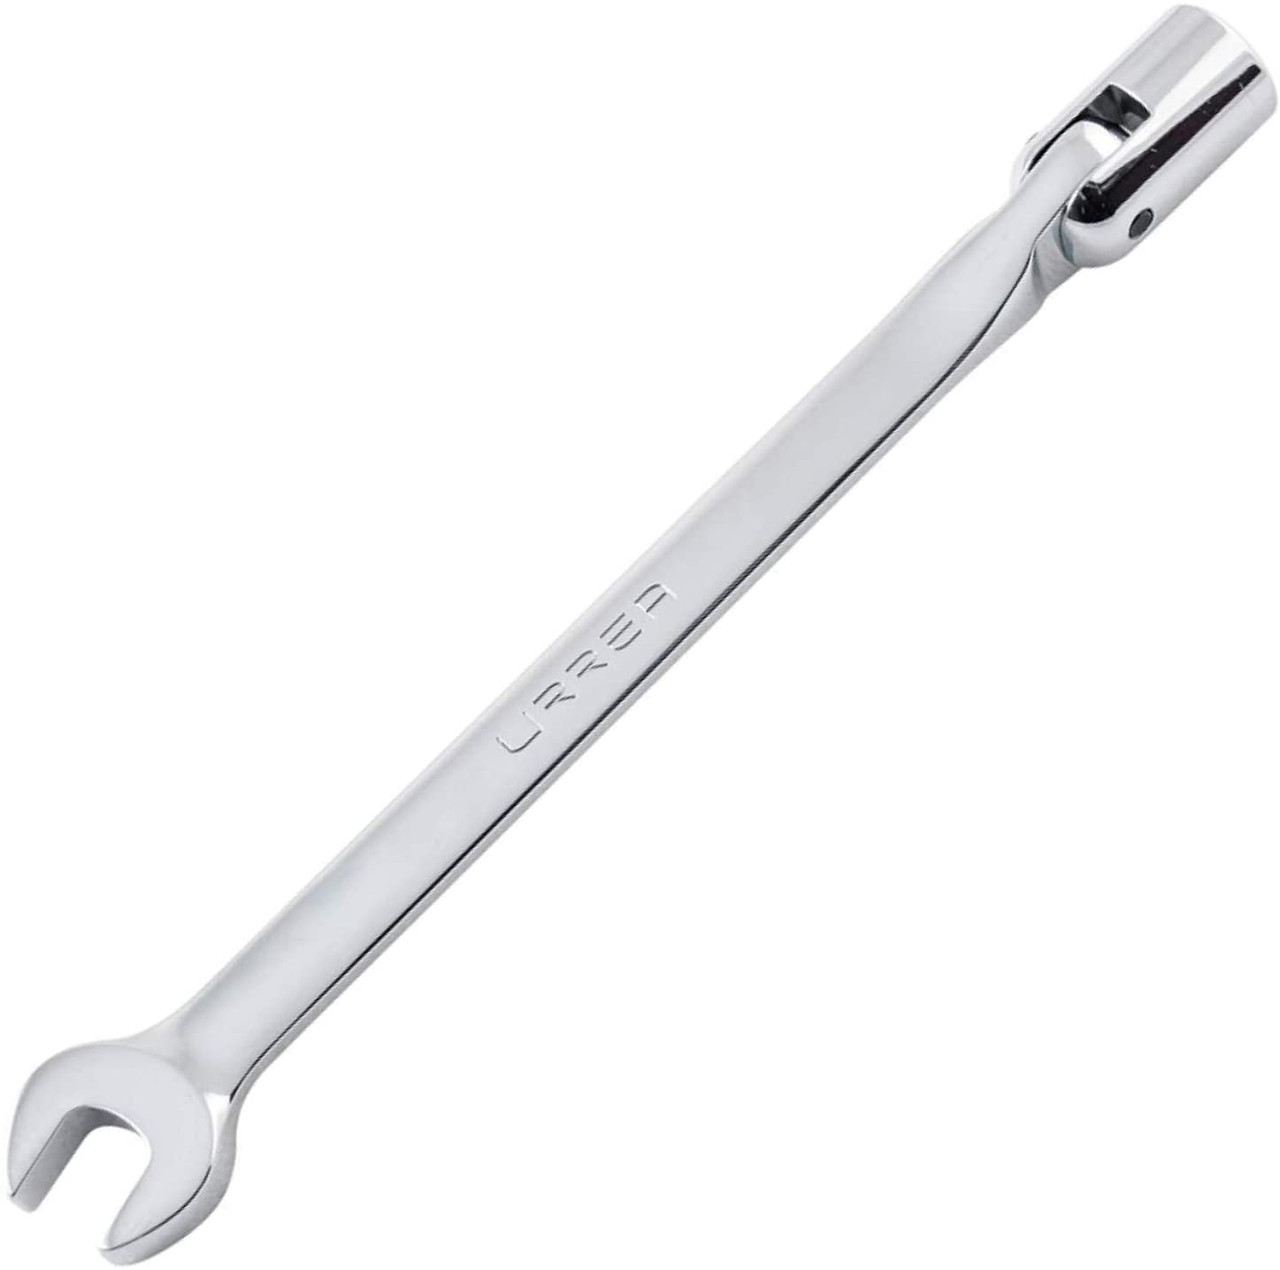 Full Polished flex head wrench, Size: 15 mm, 12 point, Total Length: 9-1/16"